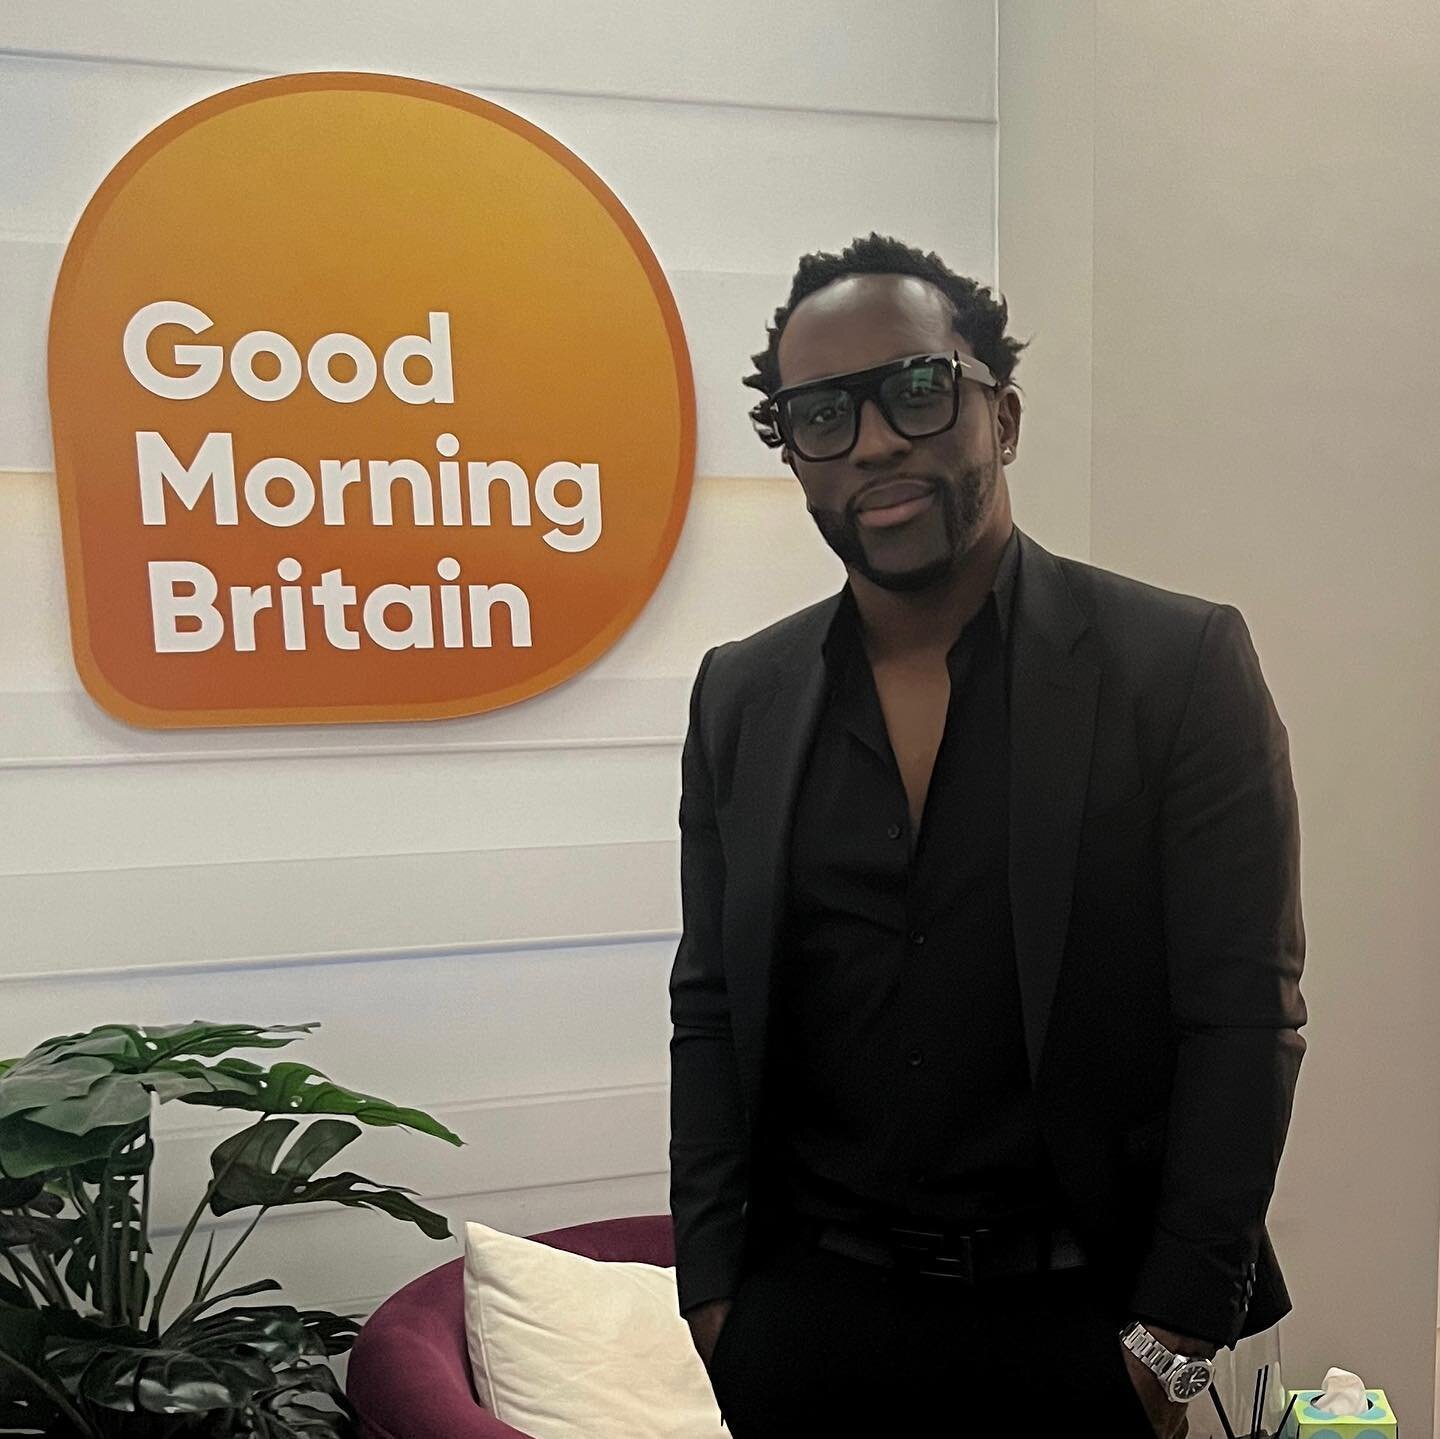 Back to back days with @gmb family. Brilliant chatting with the Apprentice legend - Nick Hewer. And of course always great to speak with @susannareid100&hellip; #goodmorningbritain #apprentice